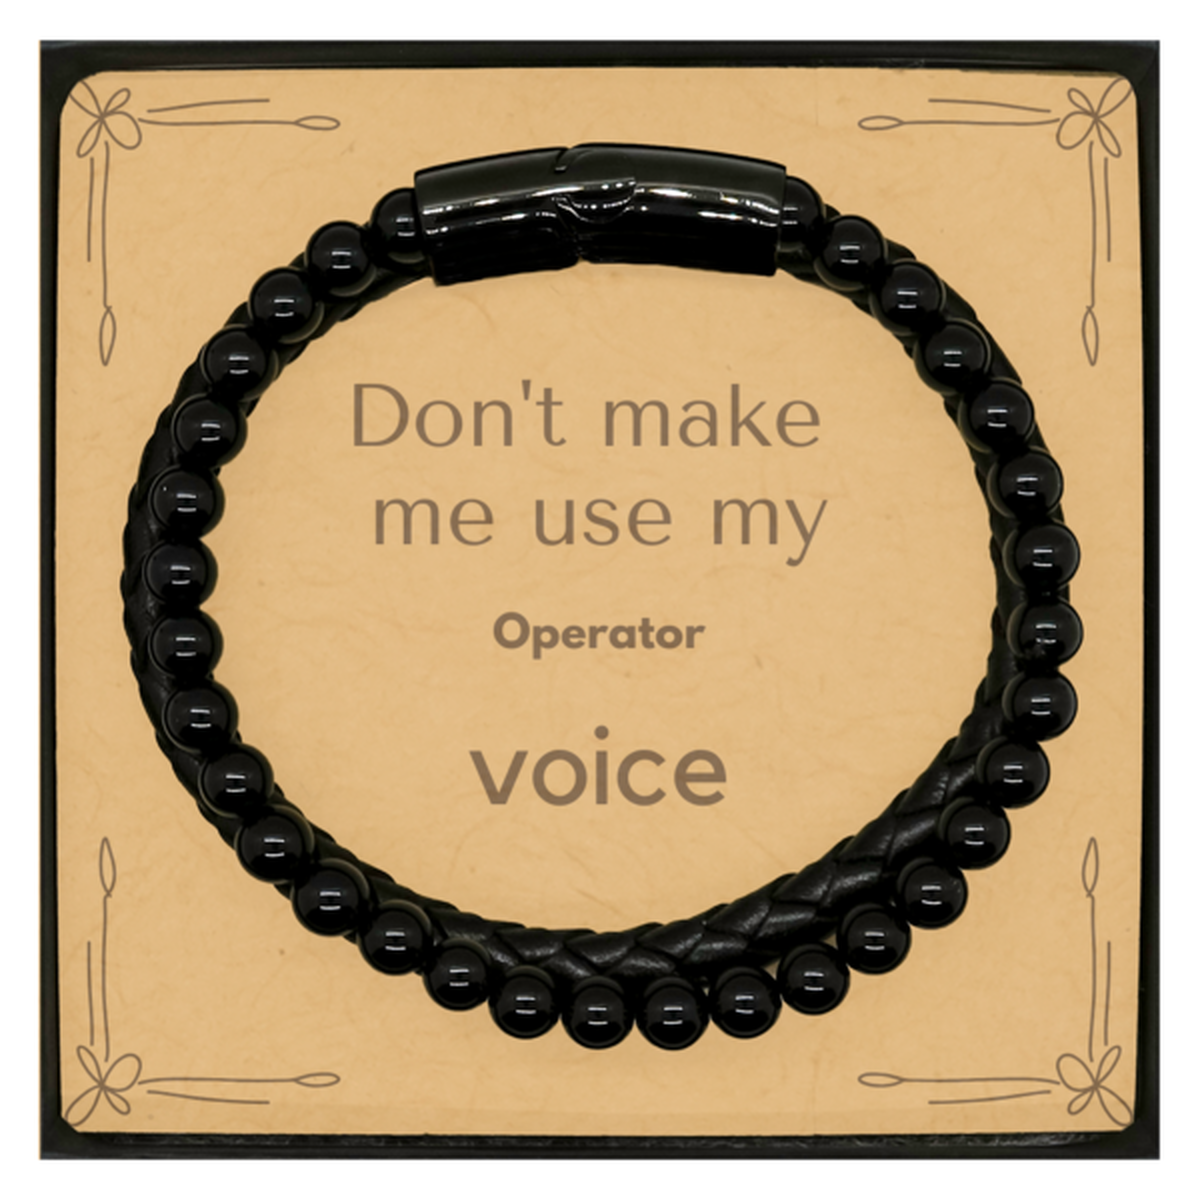 Don't make me use my Operator voice, Sarcasm Operator Card Gifts, Christmas Operator Stone Leather Bracelets Birthday Unique Gifts For Operator Coworkers, Men, Women, Colleague, Friends